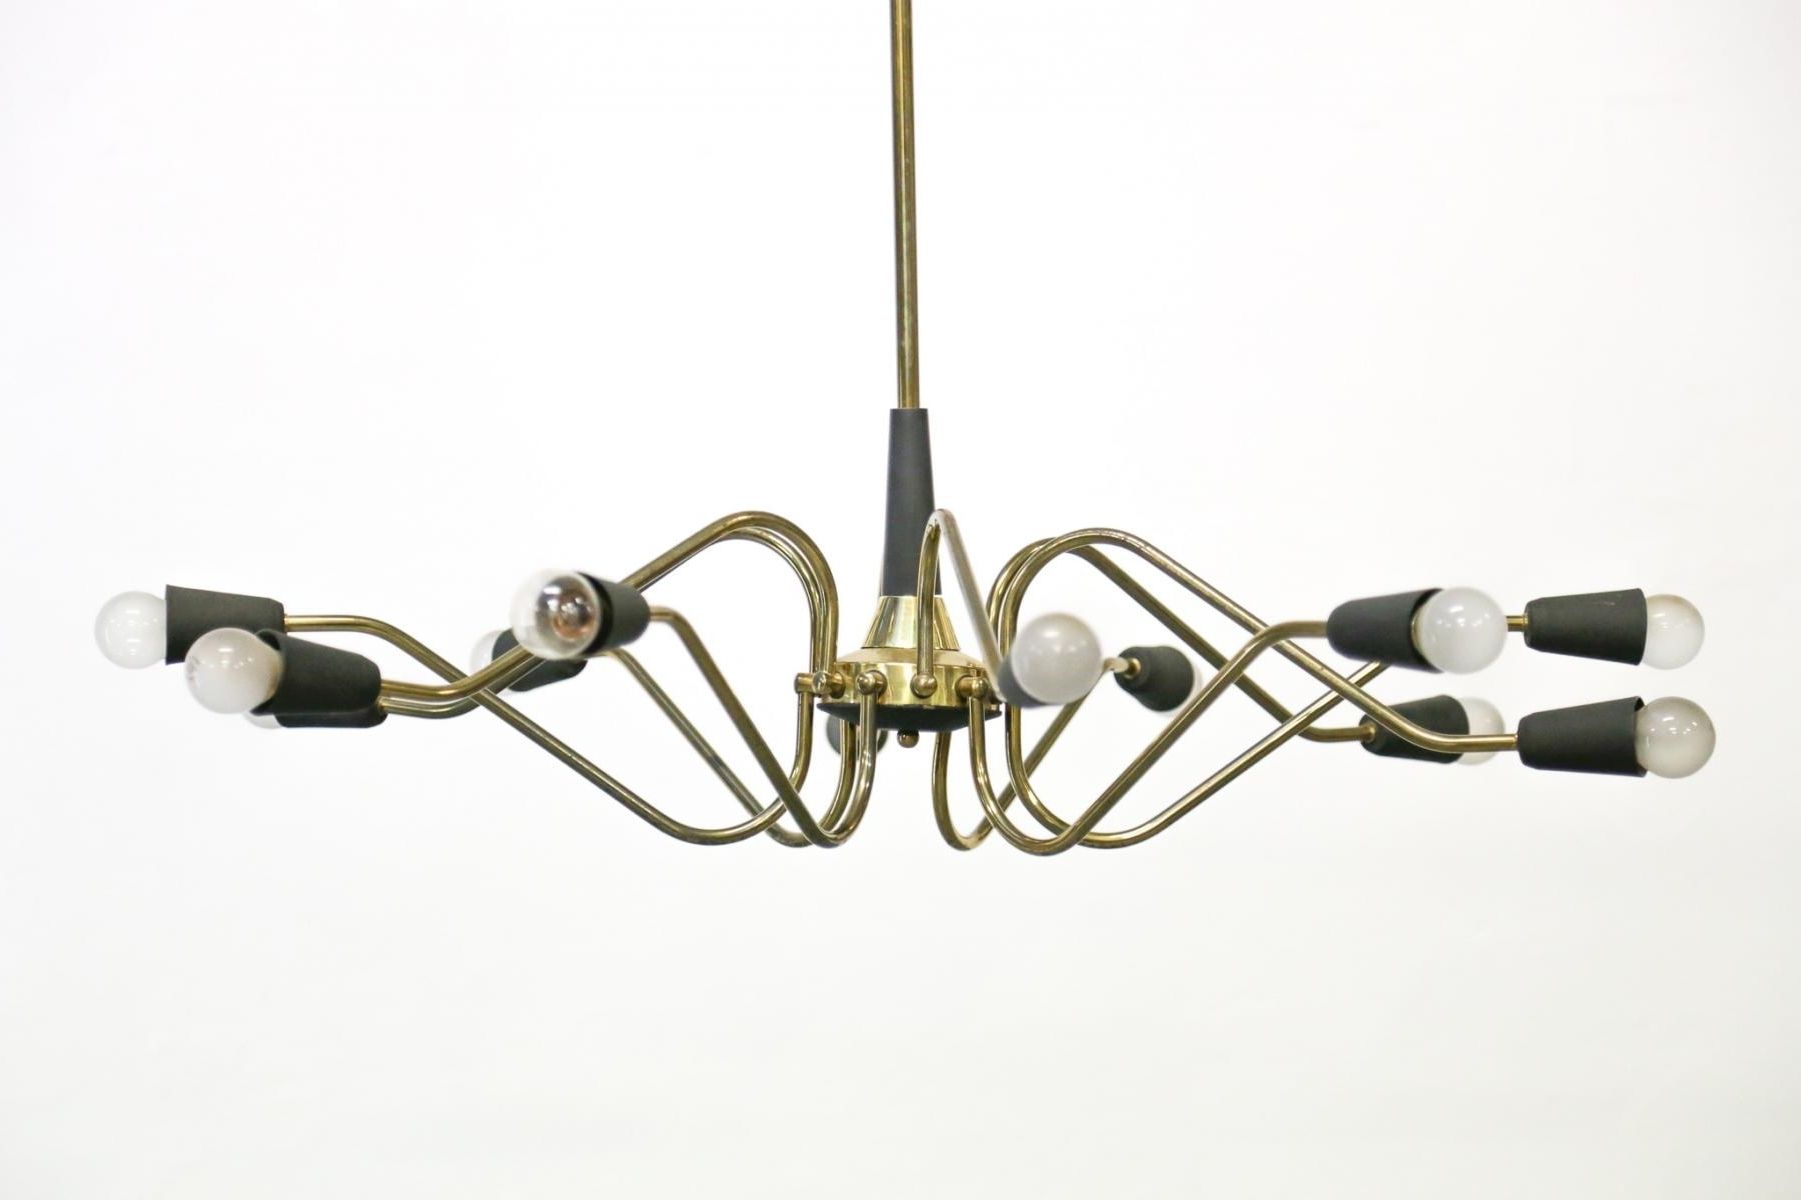 Vintage Italian Chandelier From Stilnovo For Sale At Pamono Pertaining To Most Current Vintage Italian Chandelier (View 6 of 20)